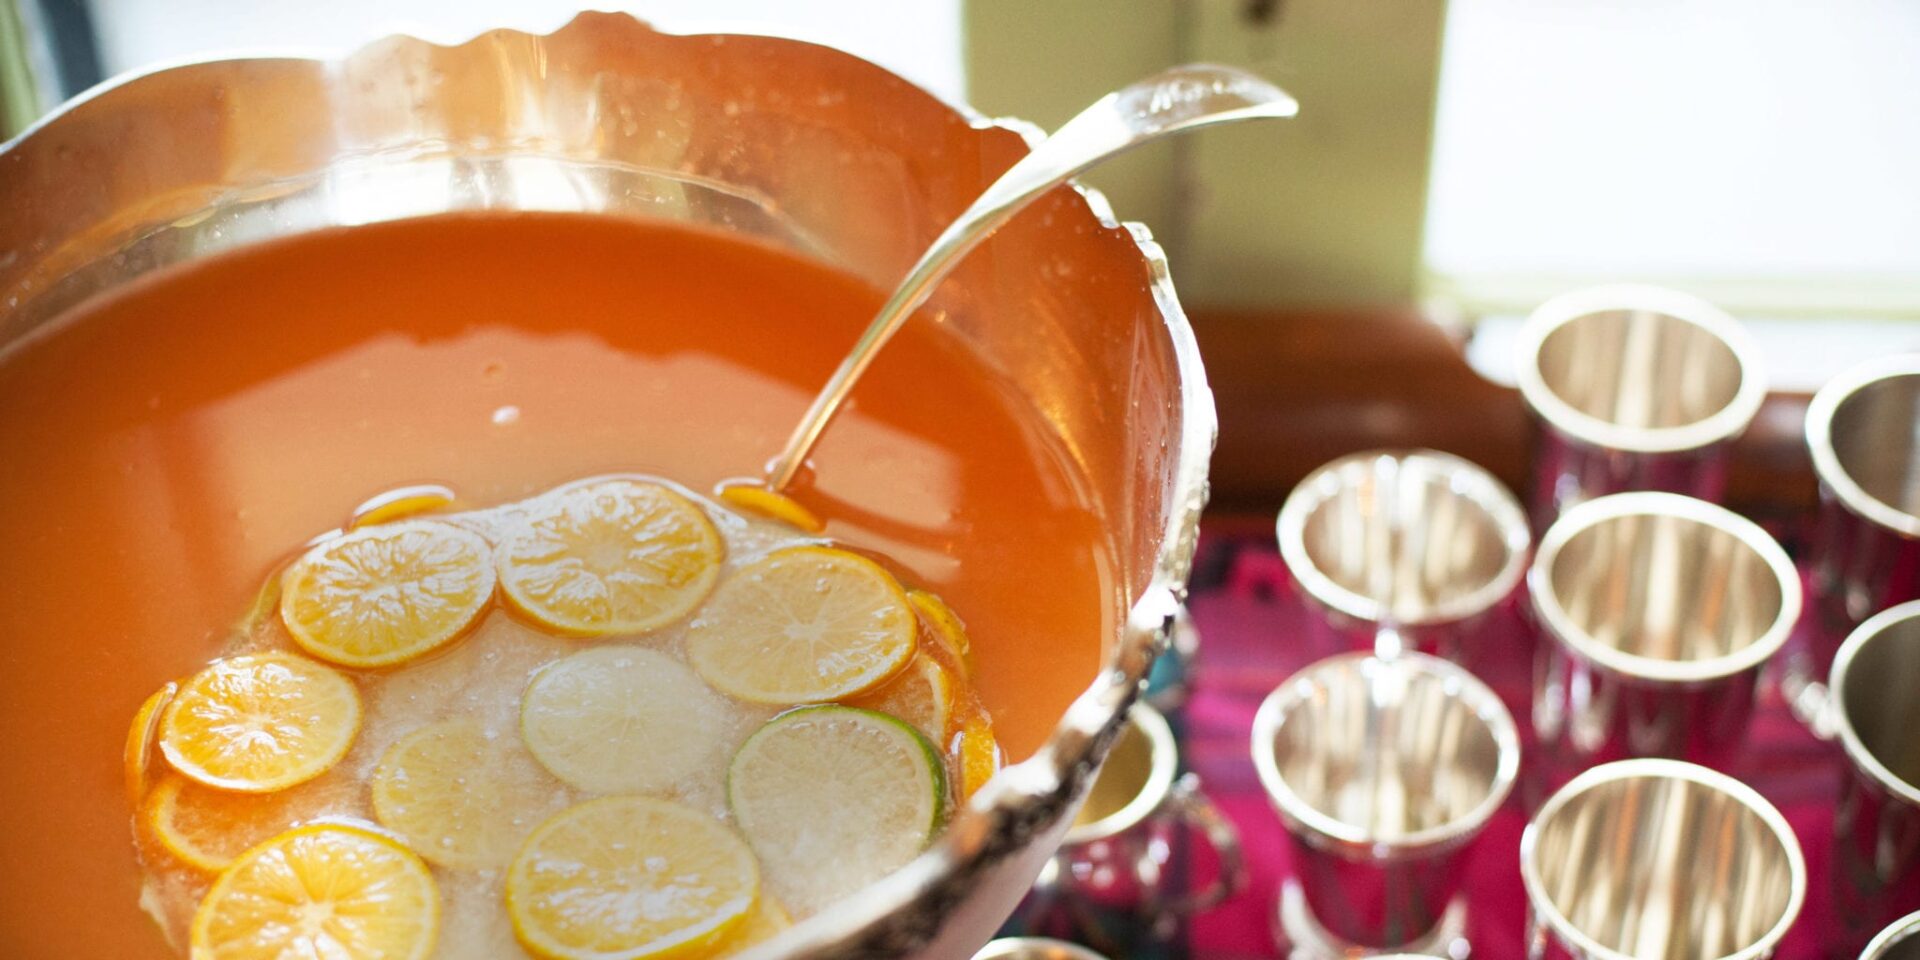 Holiday Punch from the Traditional Christmas feature in The Local Palate December 2012.